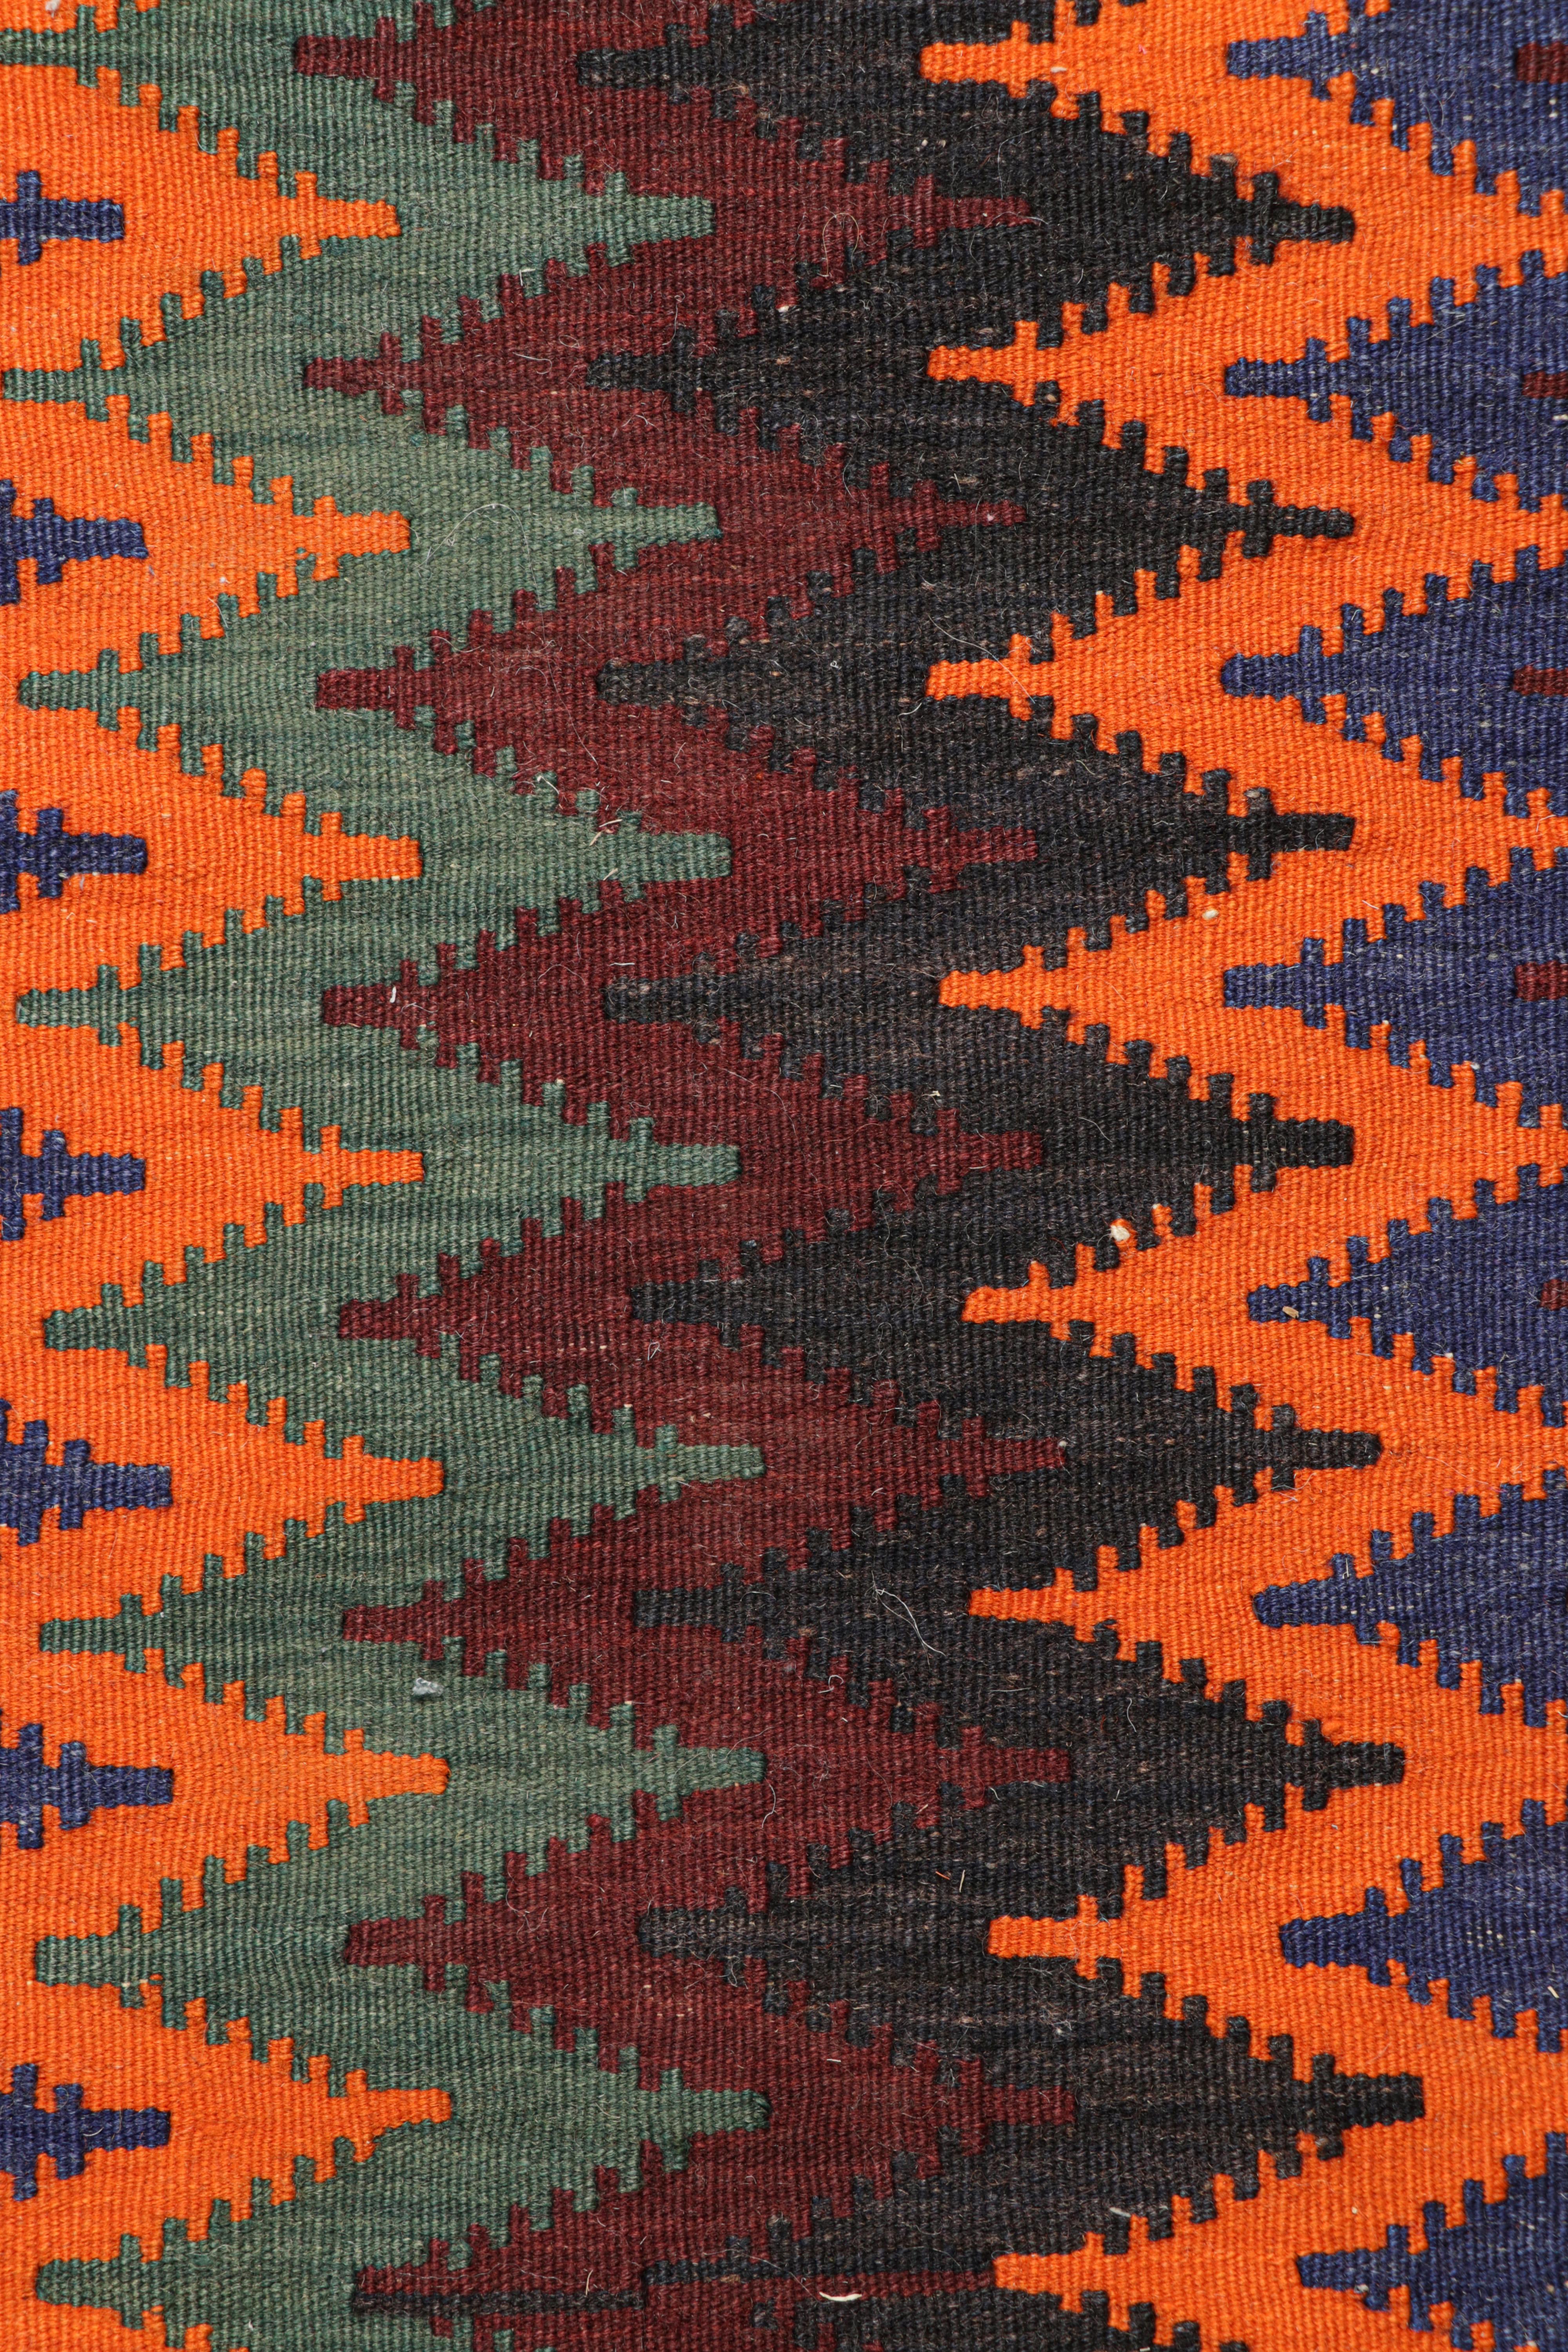 Tribal Vintage Afghan Kilim with Polychromatic Chevron Patterns, from Rug & Kilim For Sale